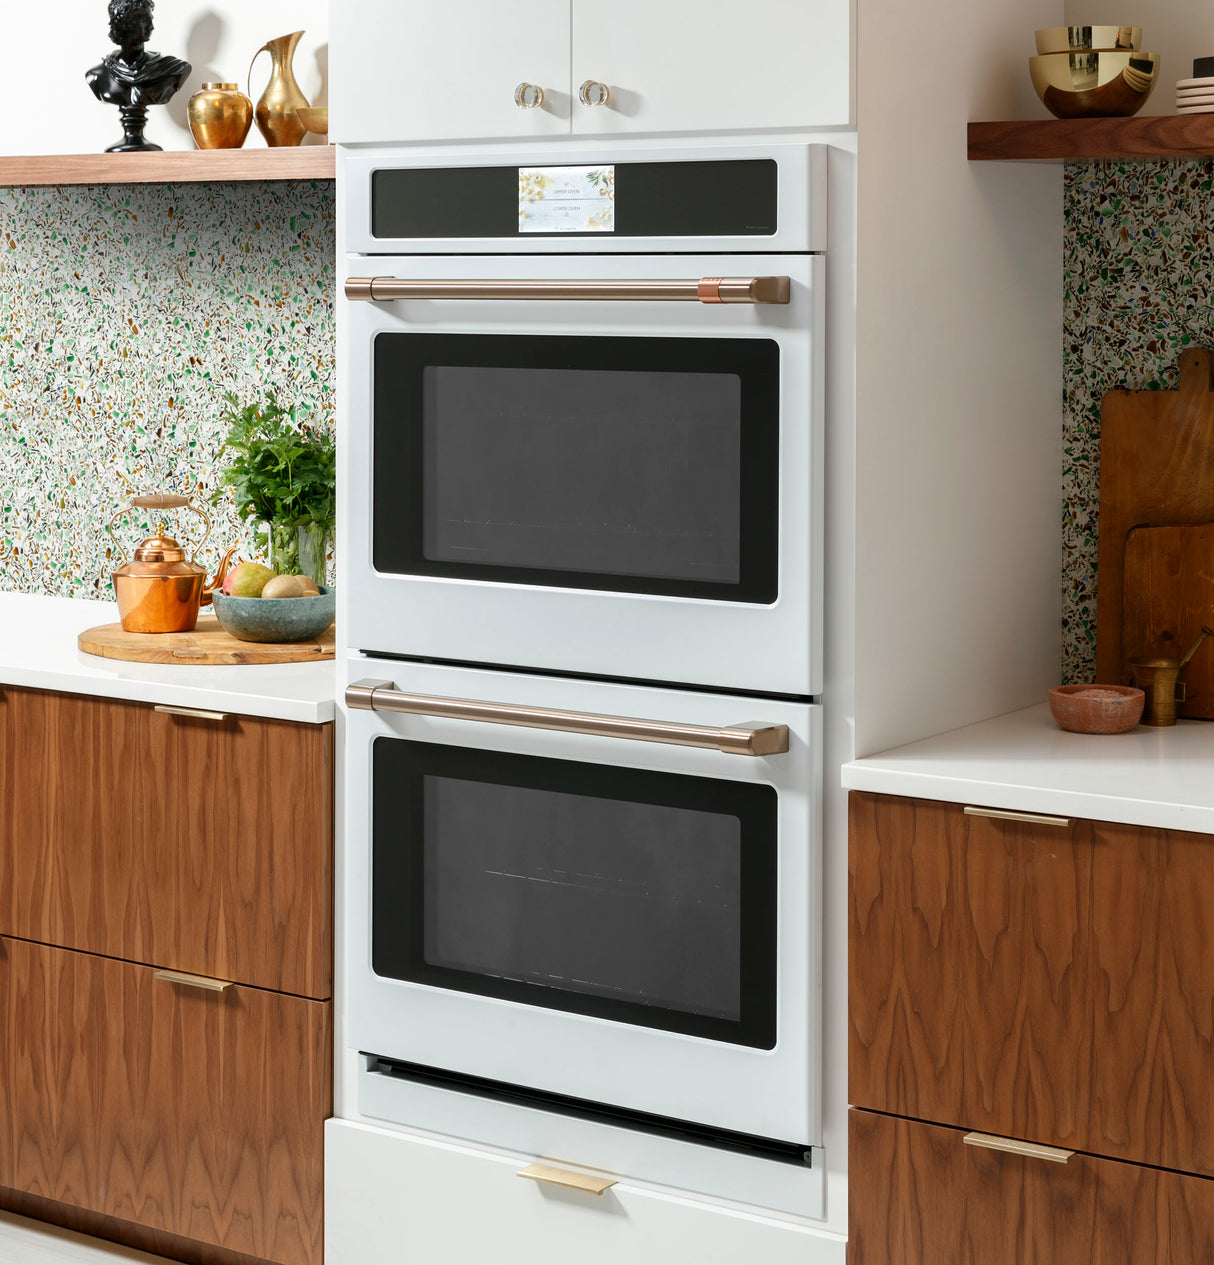 Caf(eback)(TM) Professional Series 30" Smart Built-In Convection Double Wall Oven - (CTD90DP4NW2)